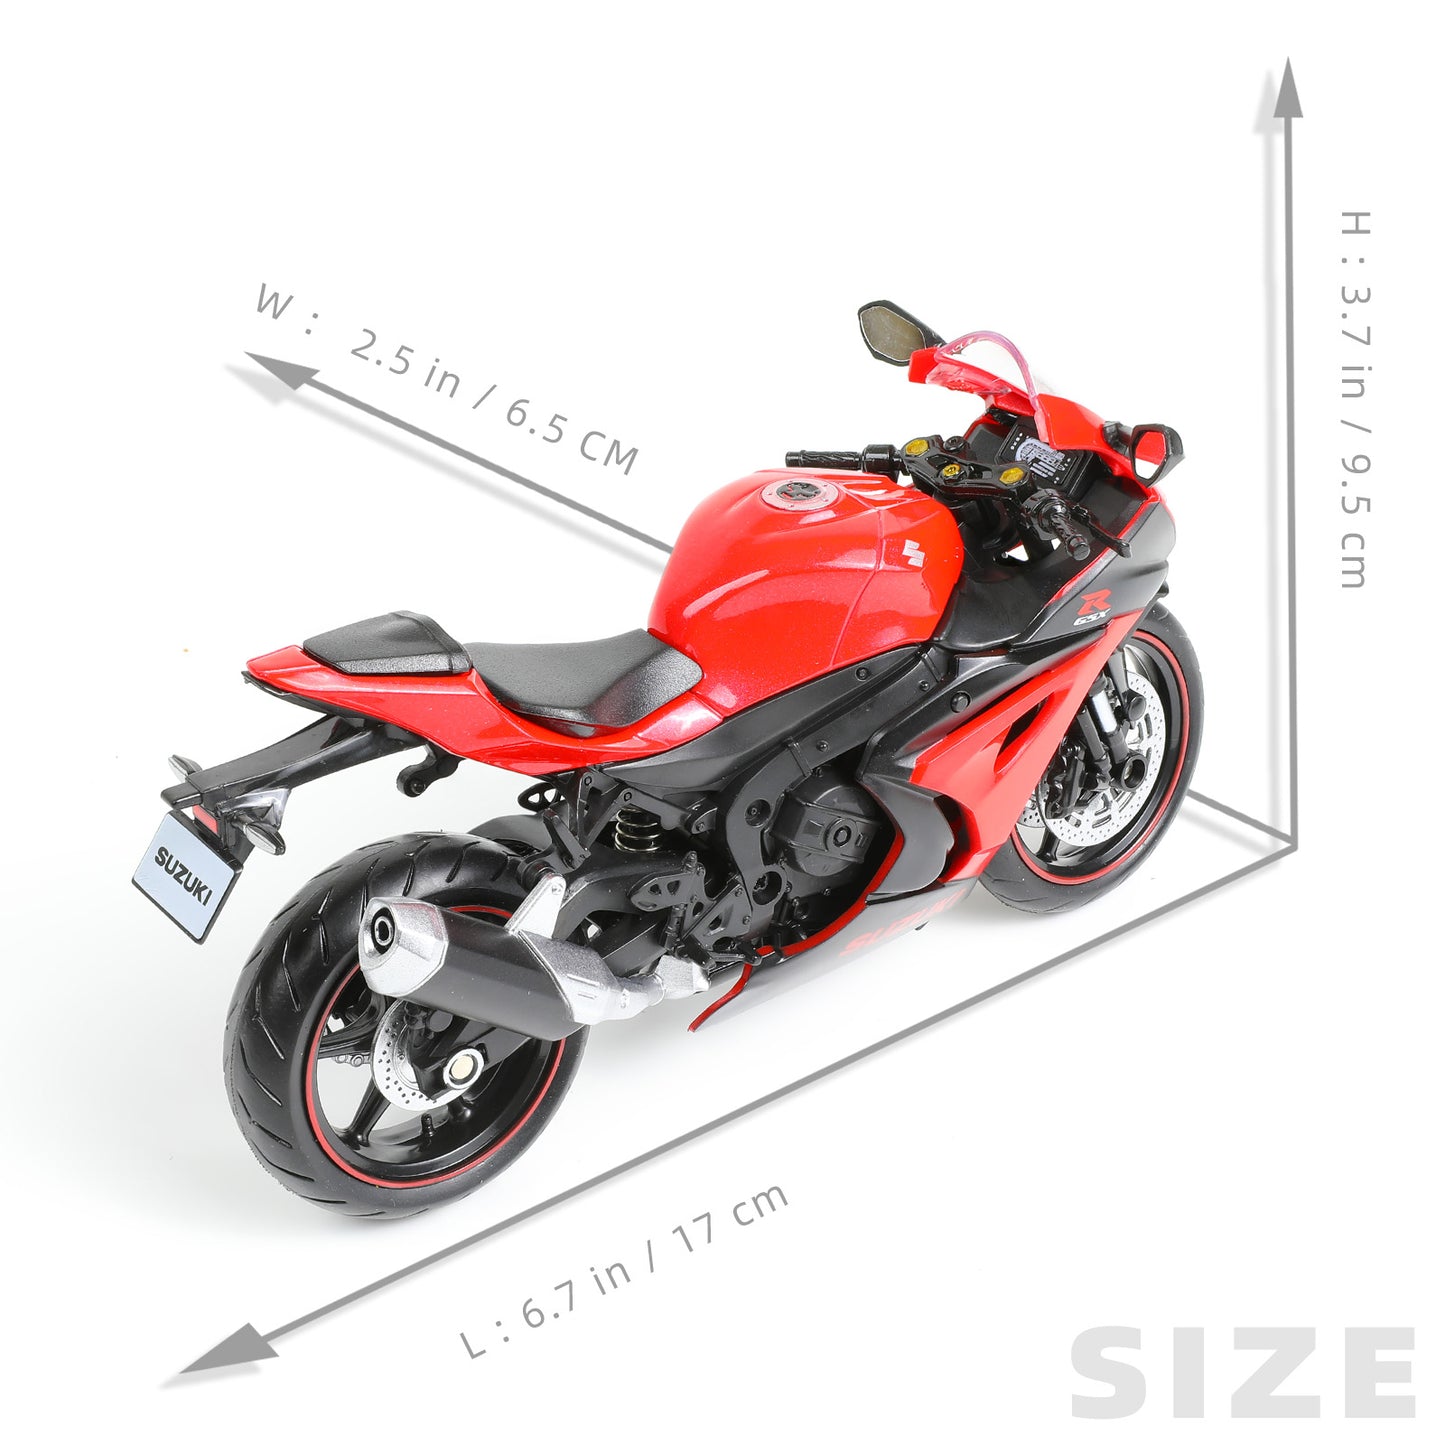 1:12 Scale DieCast Motorcycle Model for SUZUKI GSX R1000R, Realistic Motorcycle Metal Model, Kids Moto Toy or Collection,MAKEDA Pre-Built Toys Gift